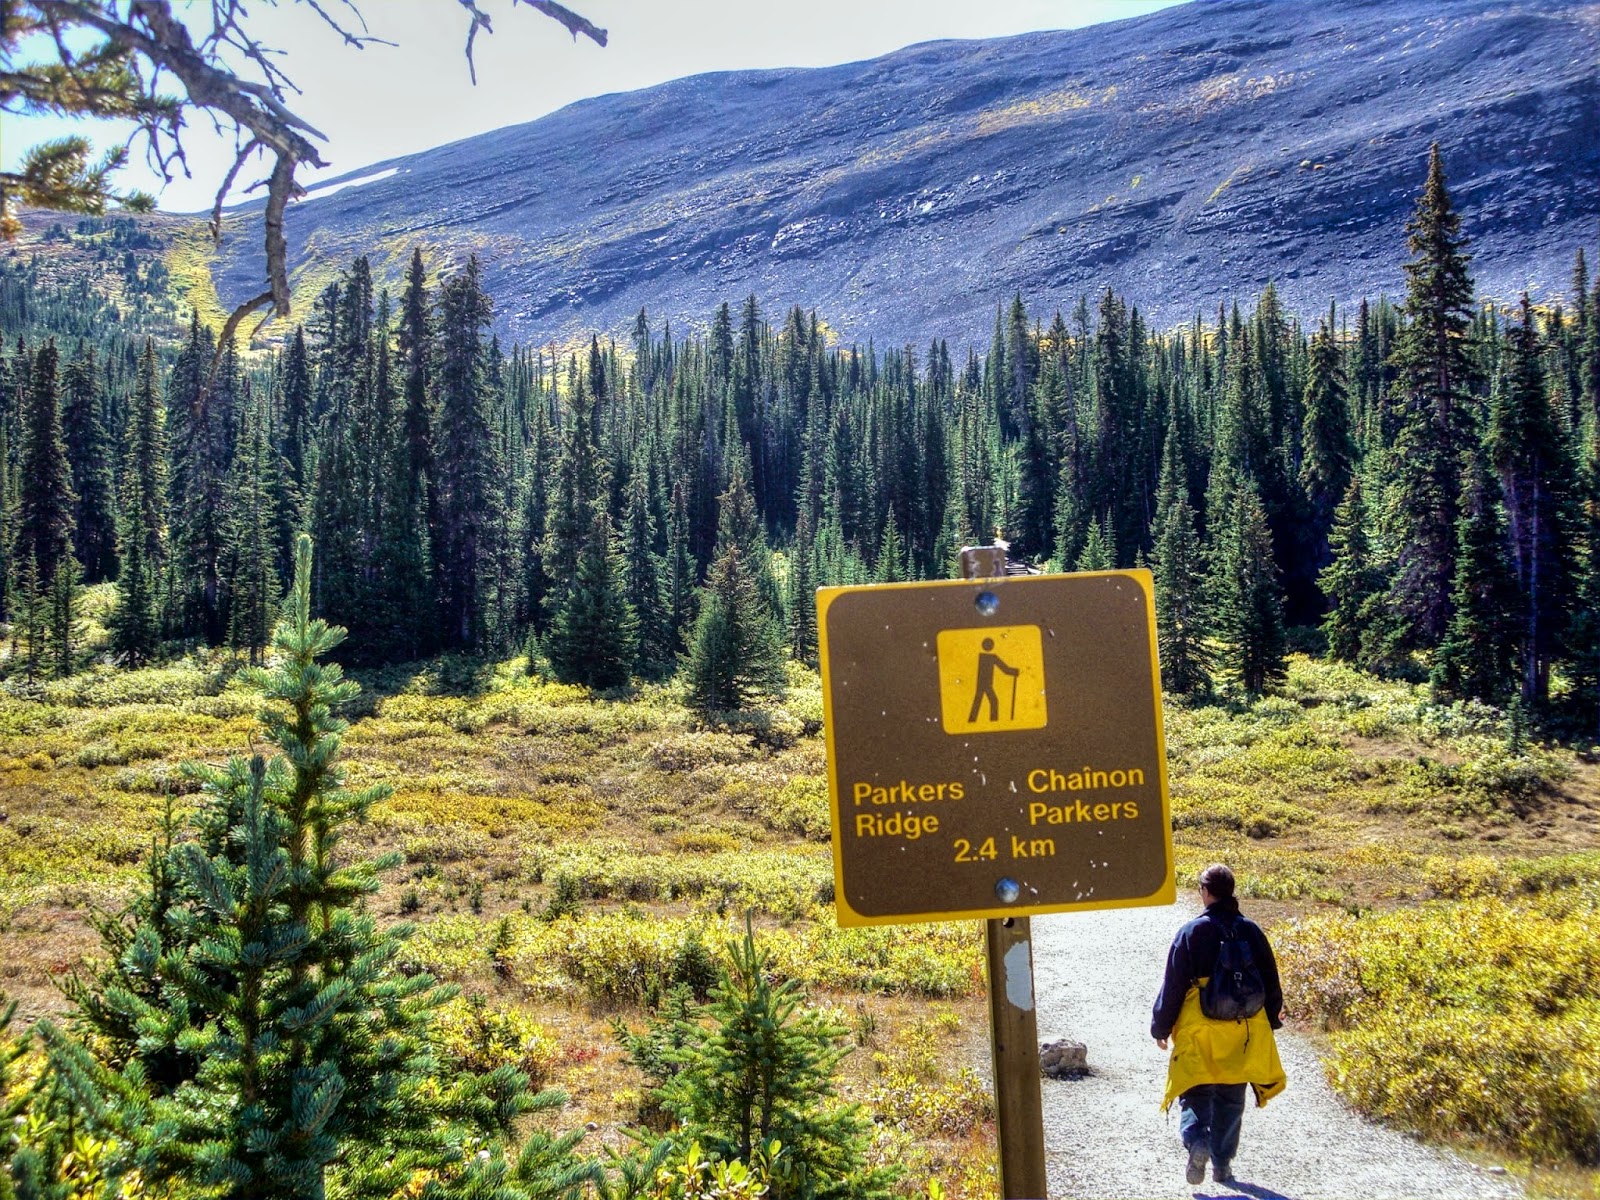 Rudolf's Blog: Short hike from the Icefields Parkway to the Parker Ridge